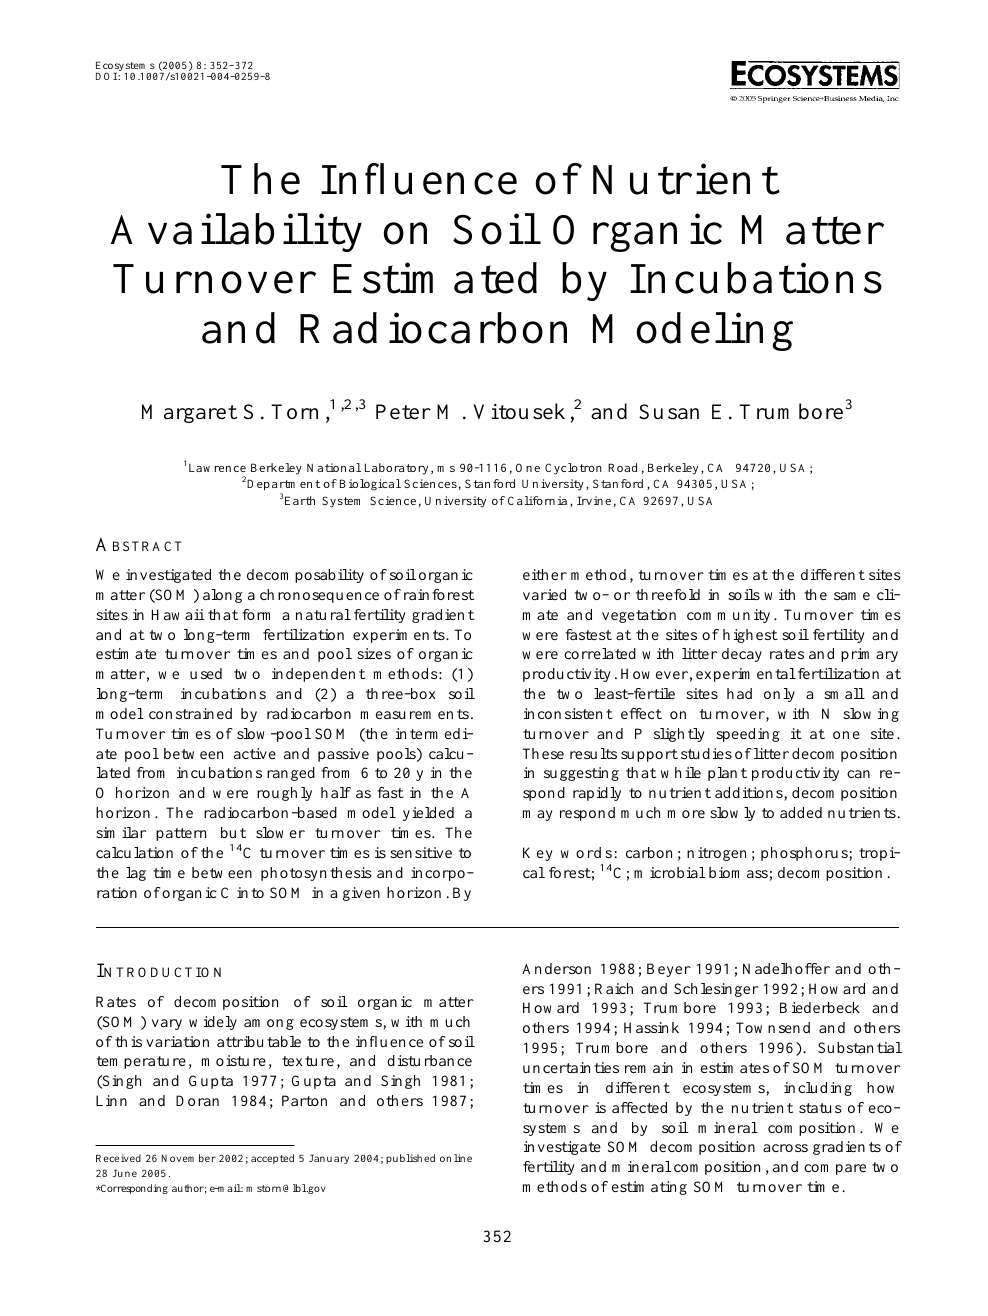 The Influence Of Nutrient Availability On Soil Organic Matter